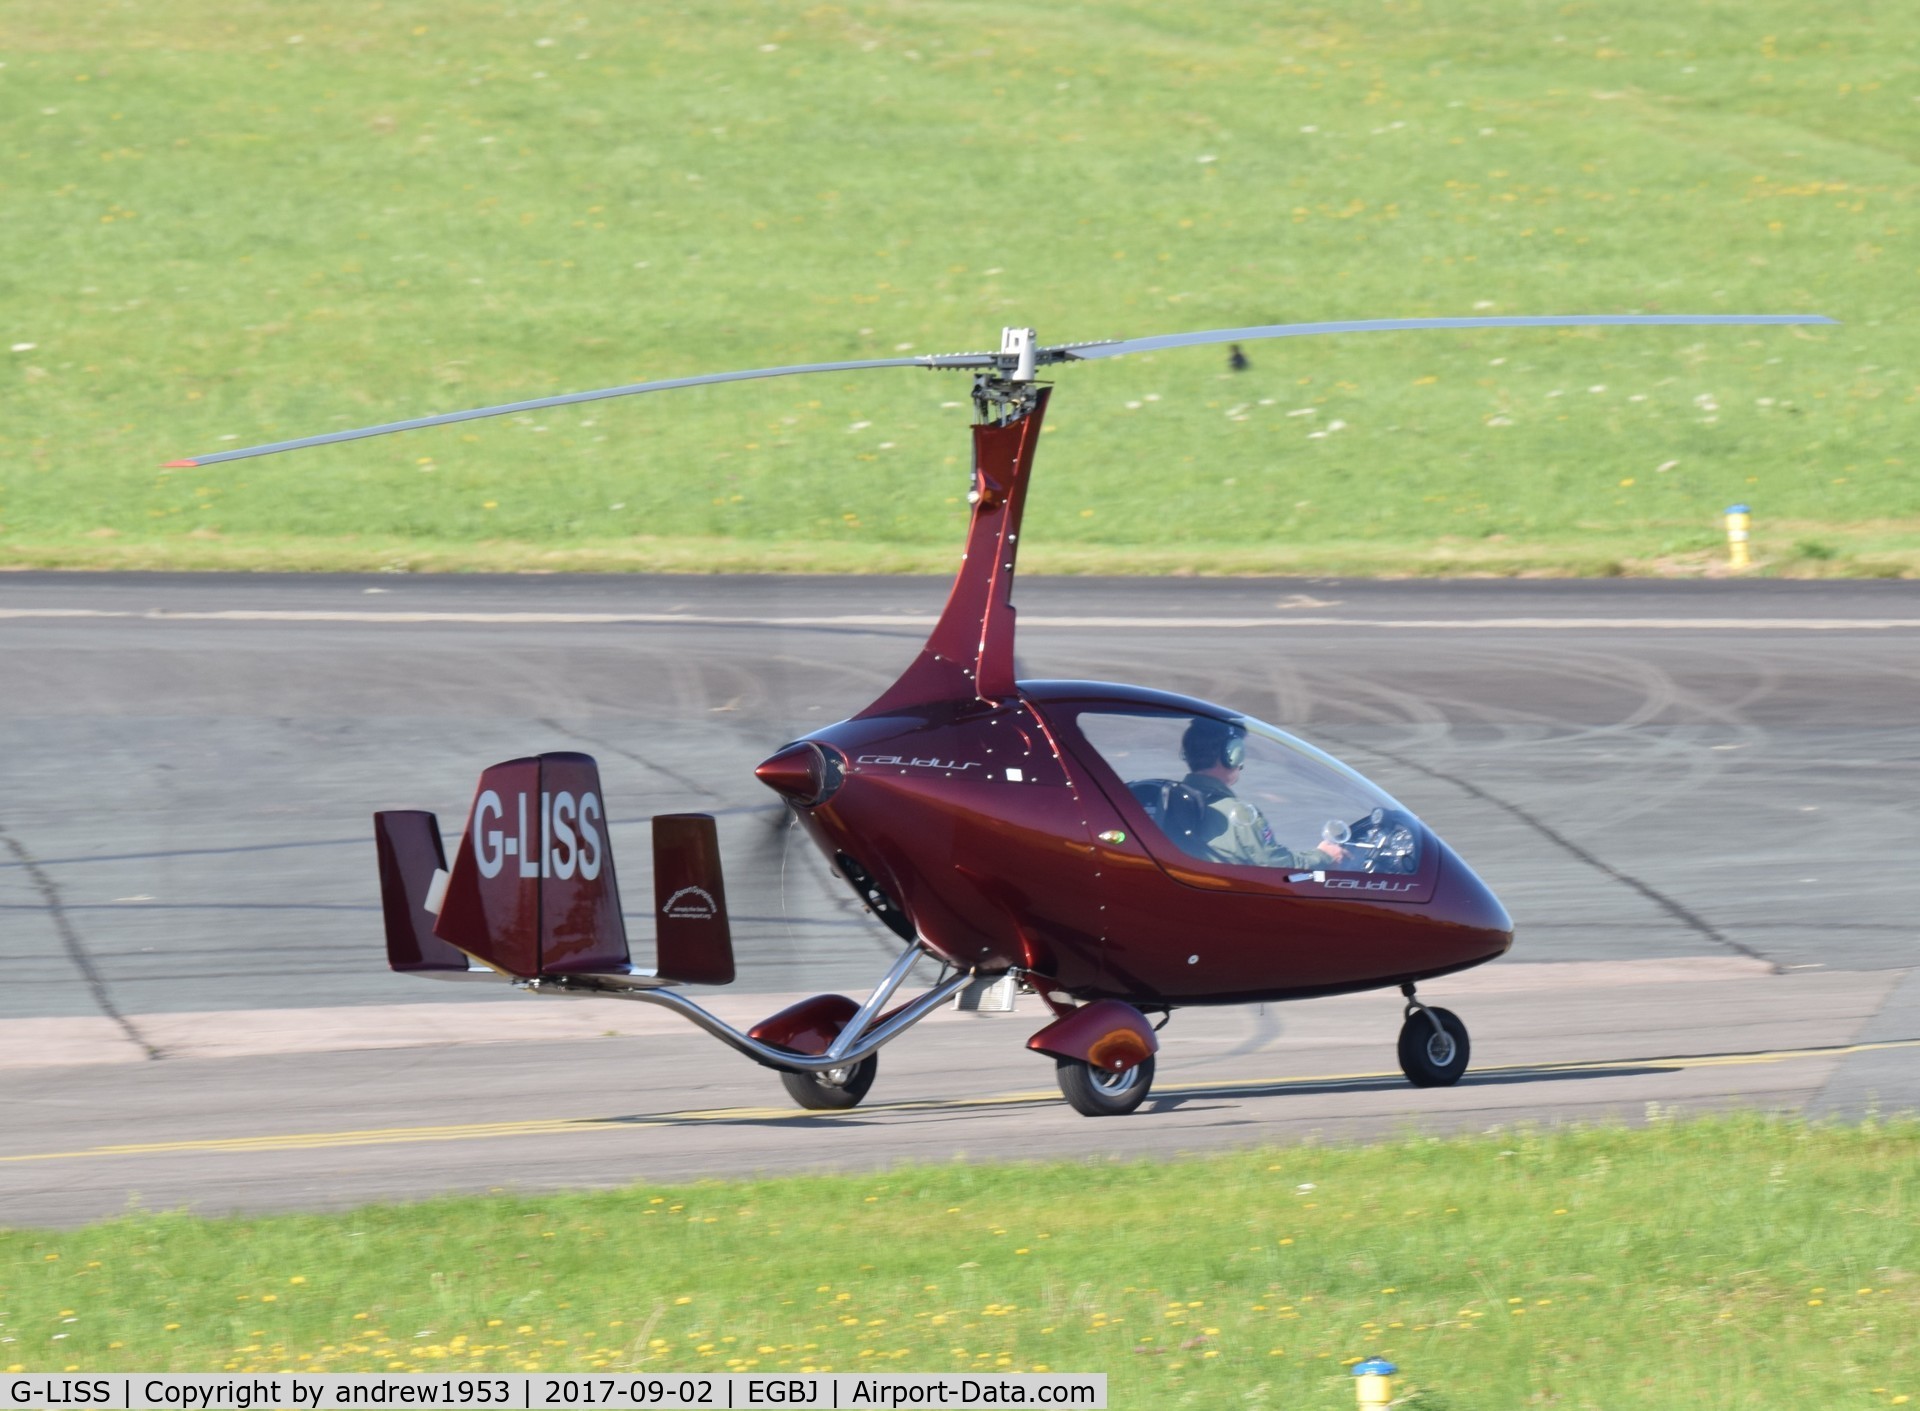 G-LISS, 2011 Rotorsport UK Calidus C/N RSUK/CALS/019, G-LISS at Gloucestershire Airport.